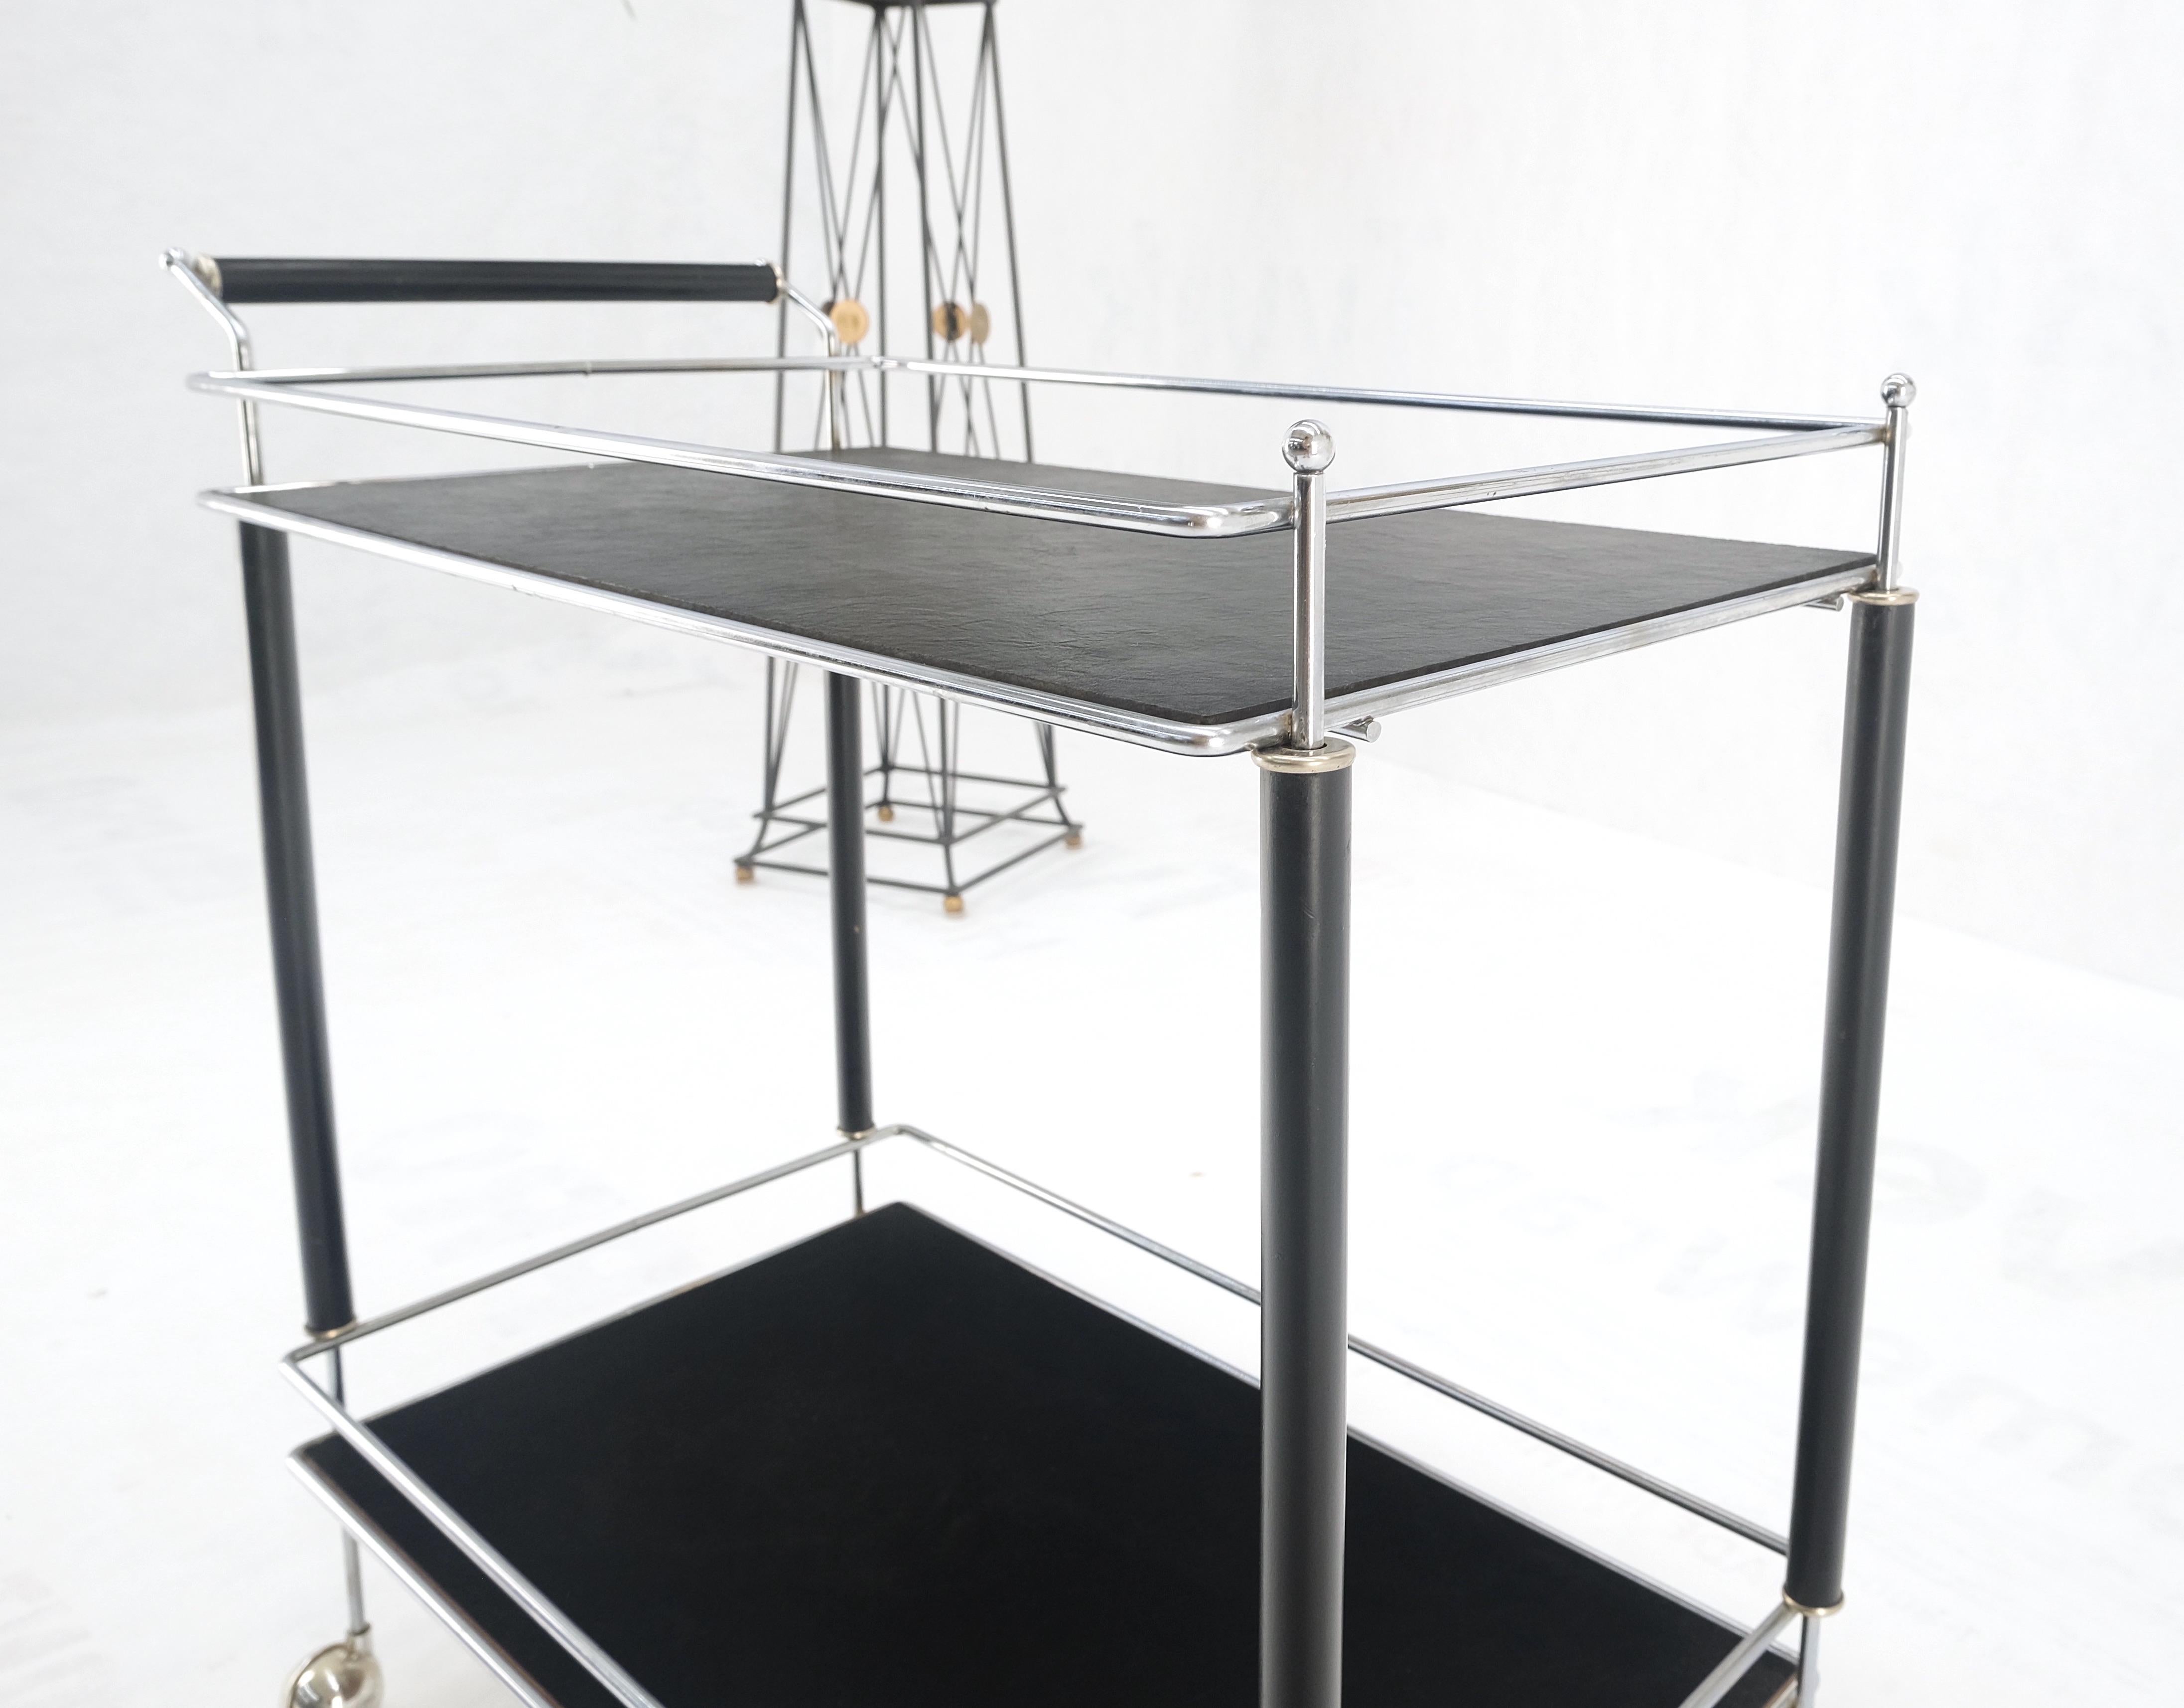 Blackened Black Lacquer & Chrome Bauhaus Two Tier Serving Cart on Wheels  c.1940s MINT  For Sale